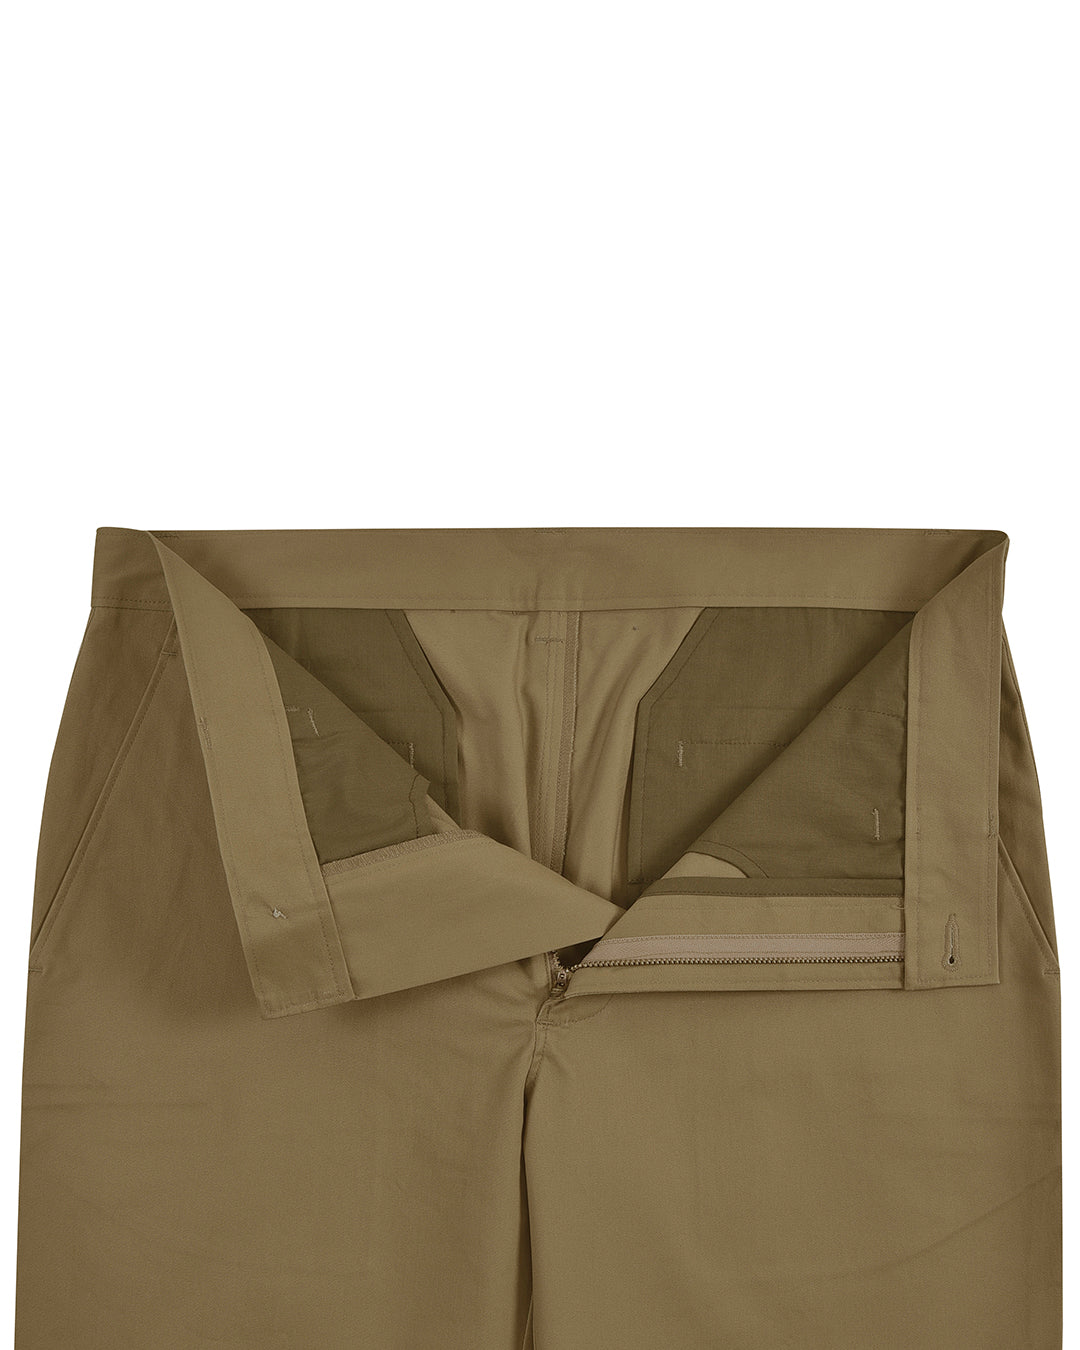 Front open view of custom Genoa Chino pants for men by Luxire in light copper